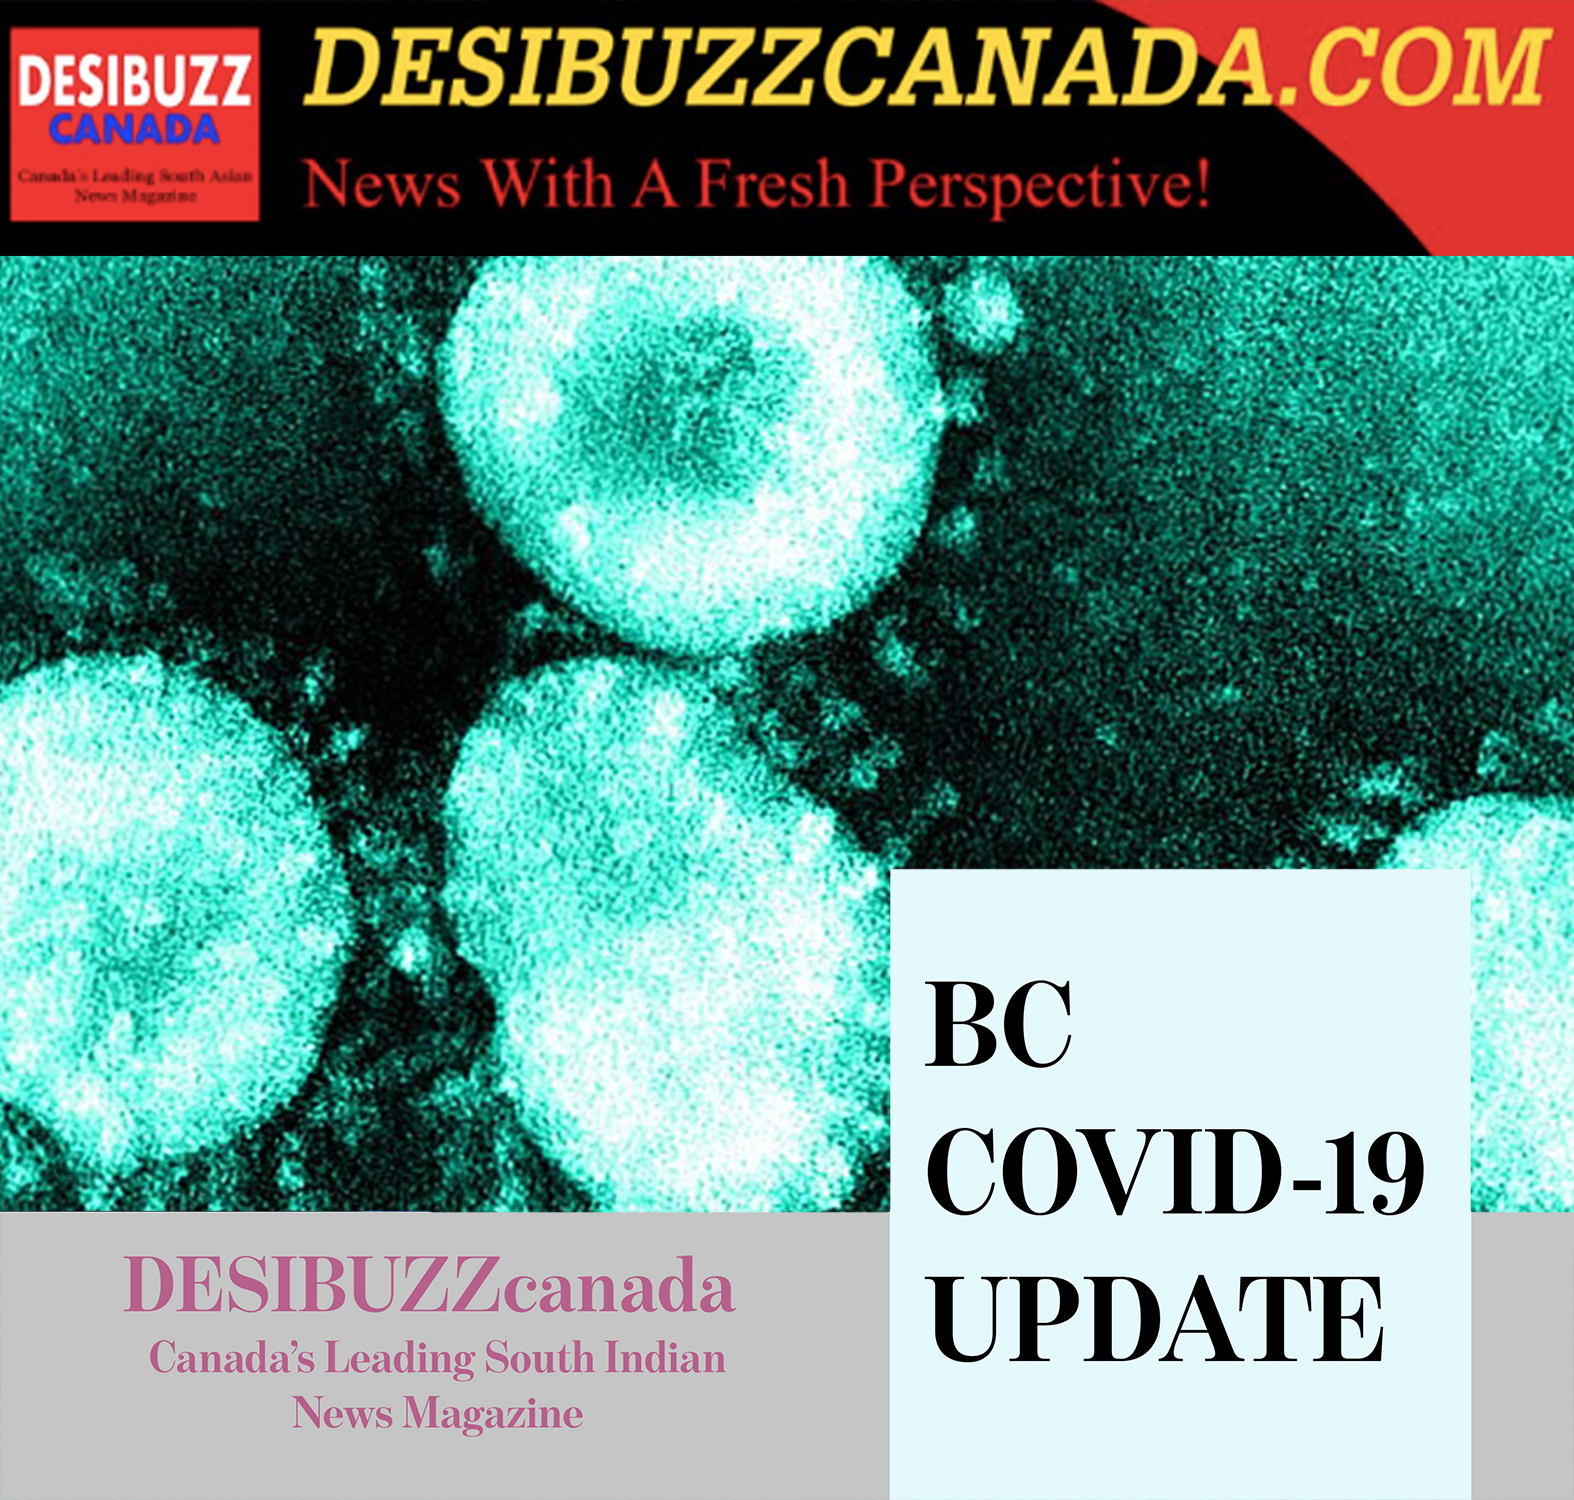 BC COVID-19 UPDATE: Cases Continue Their Slide With Less Than 1000 Since Friday